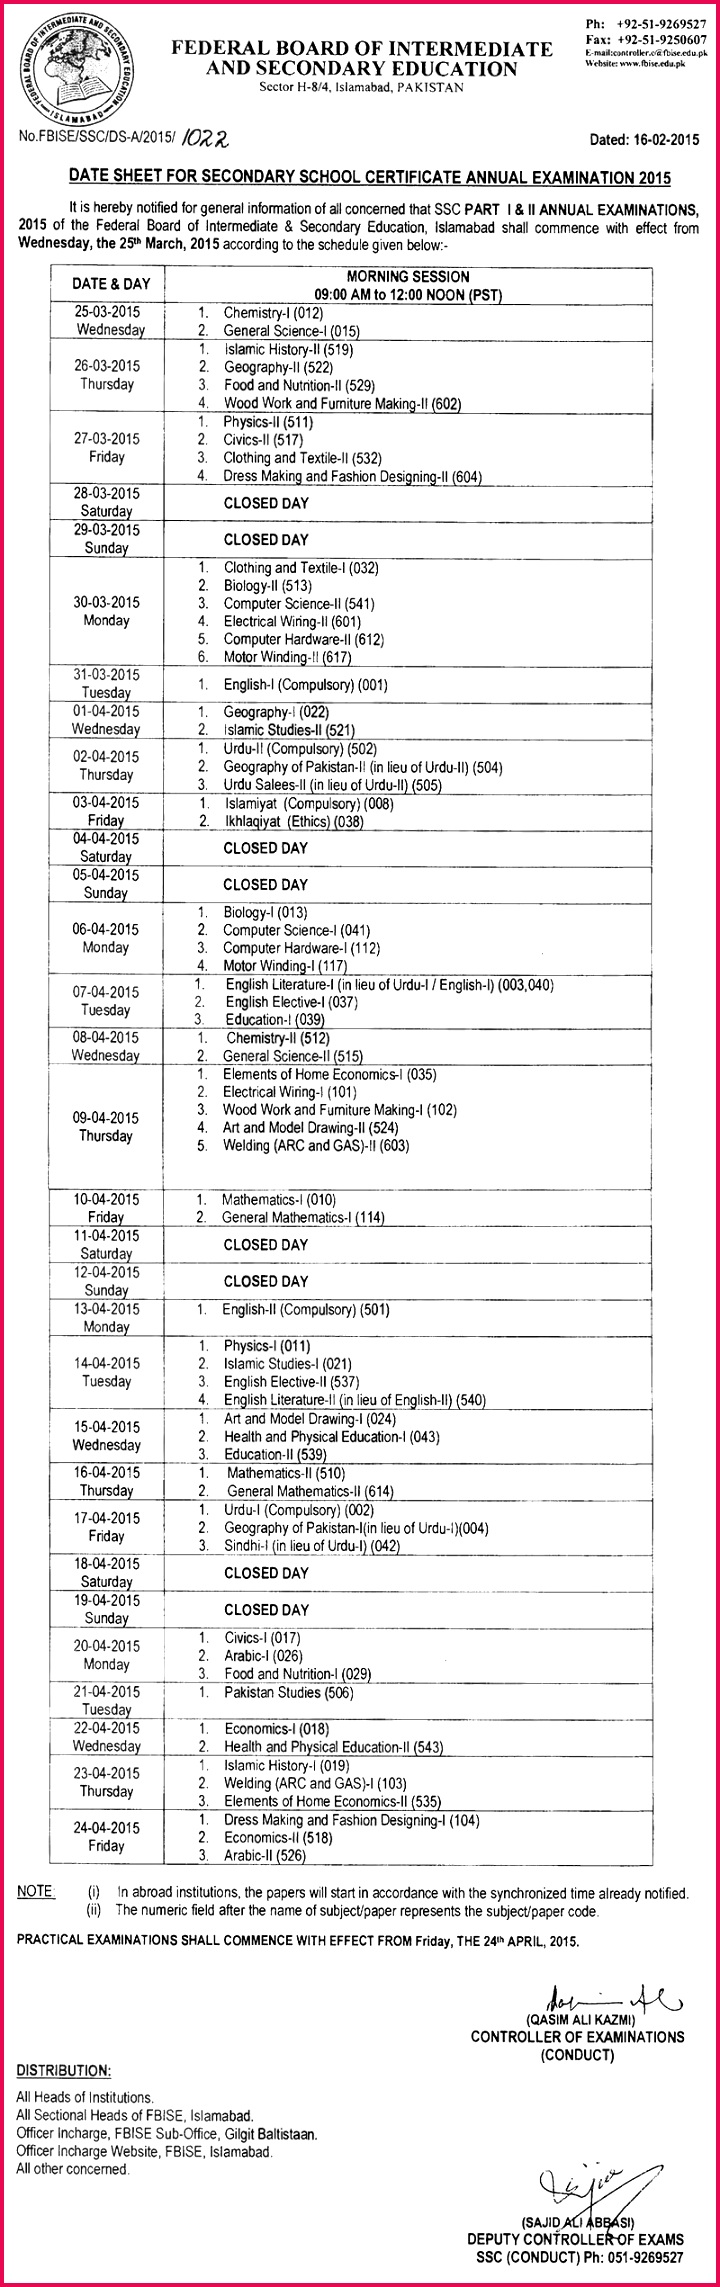 BISE Federal Board Matric Date Sheets 2015